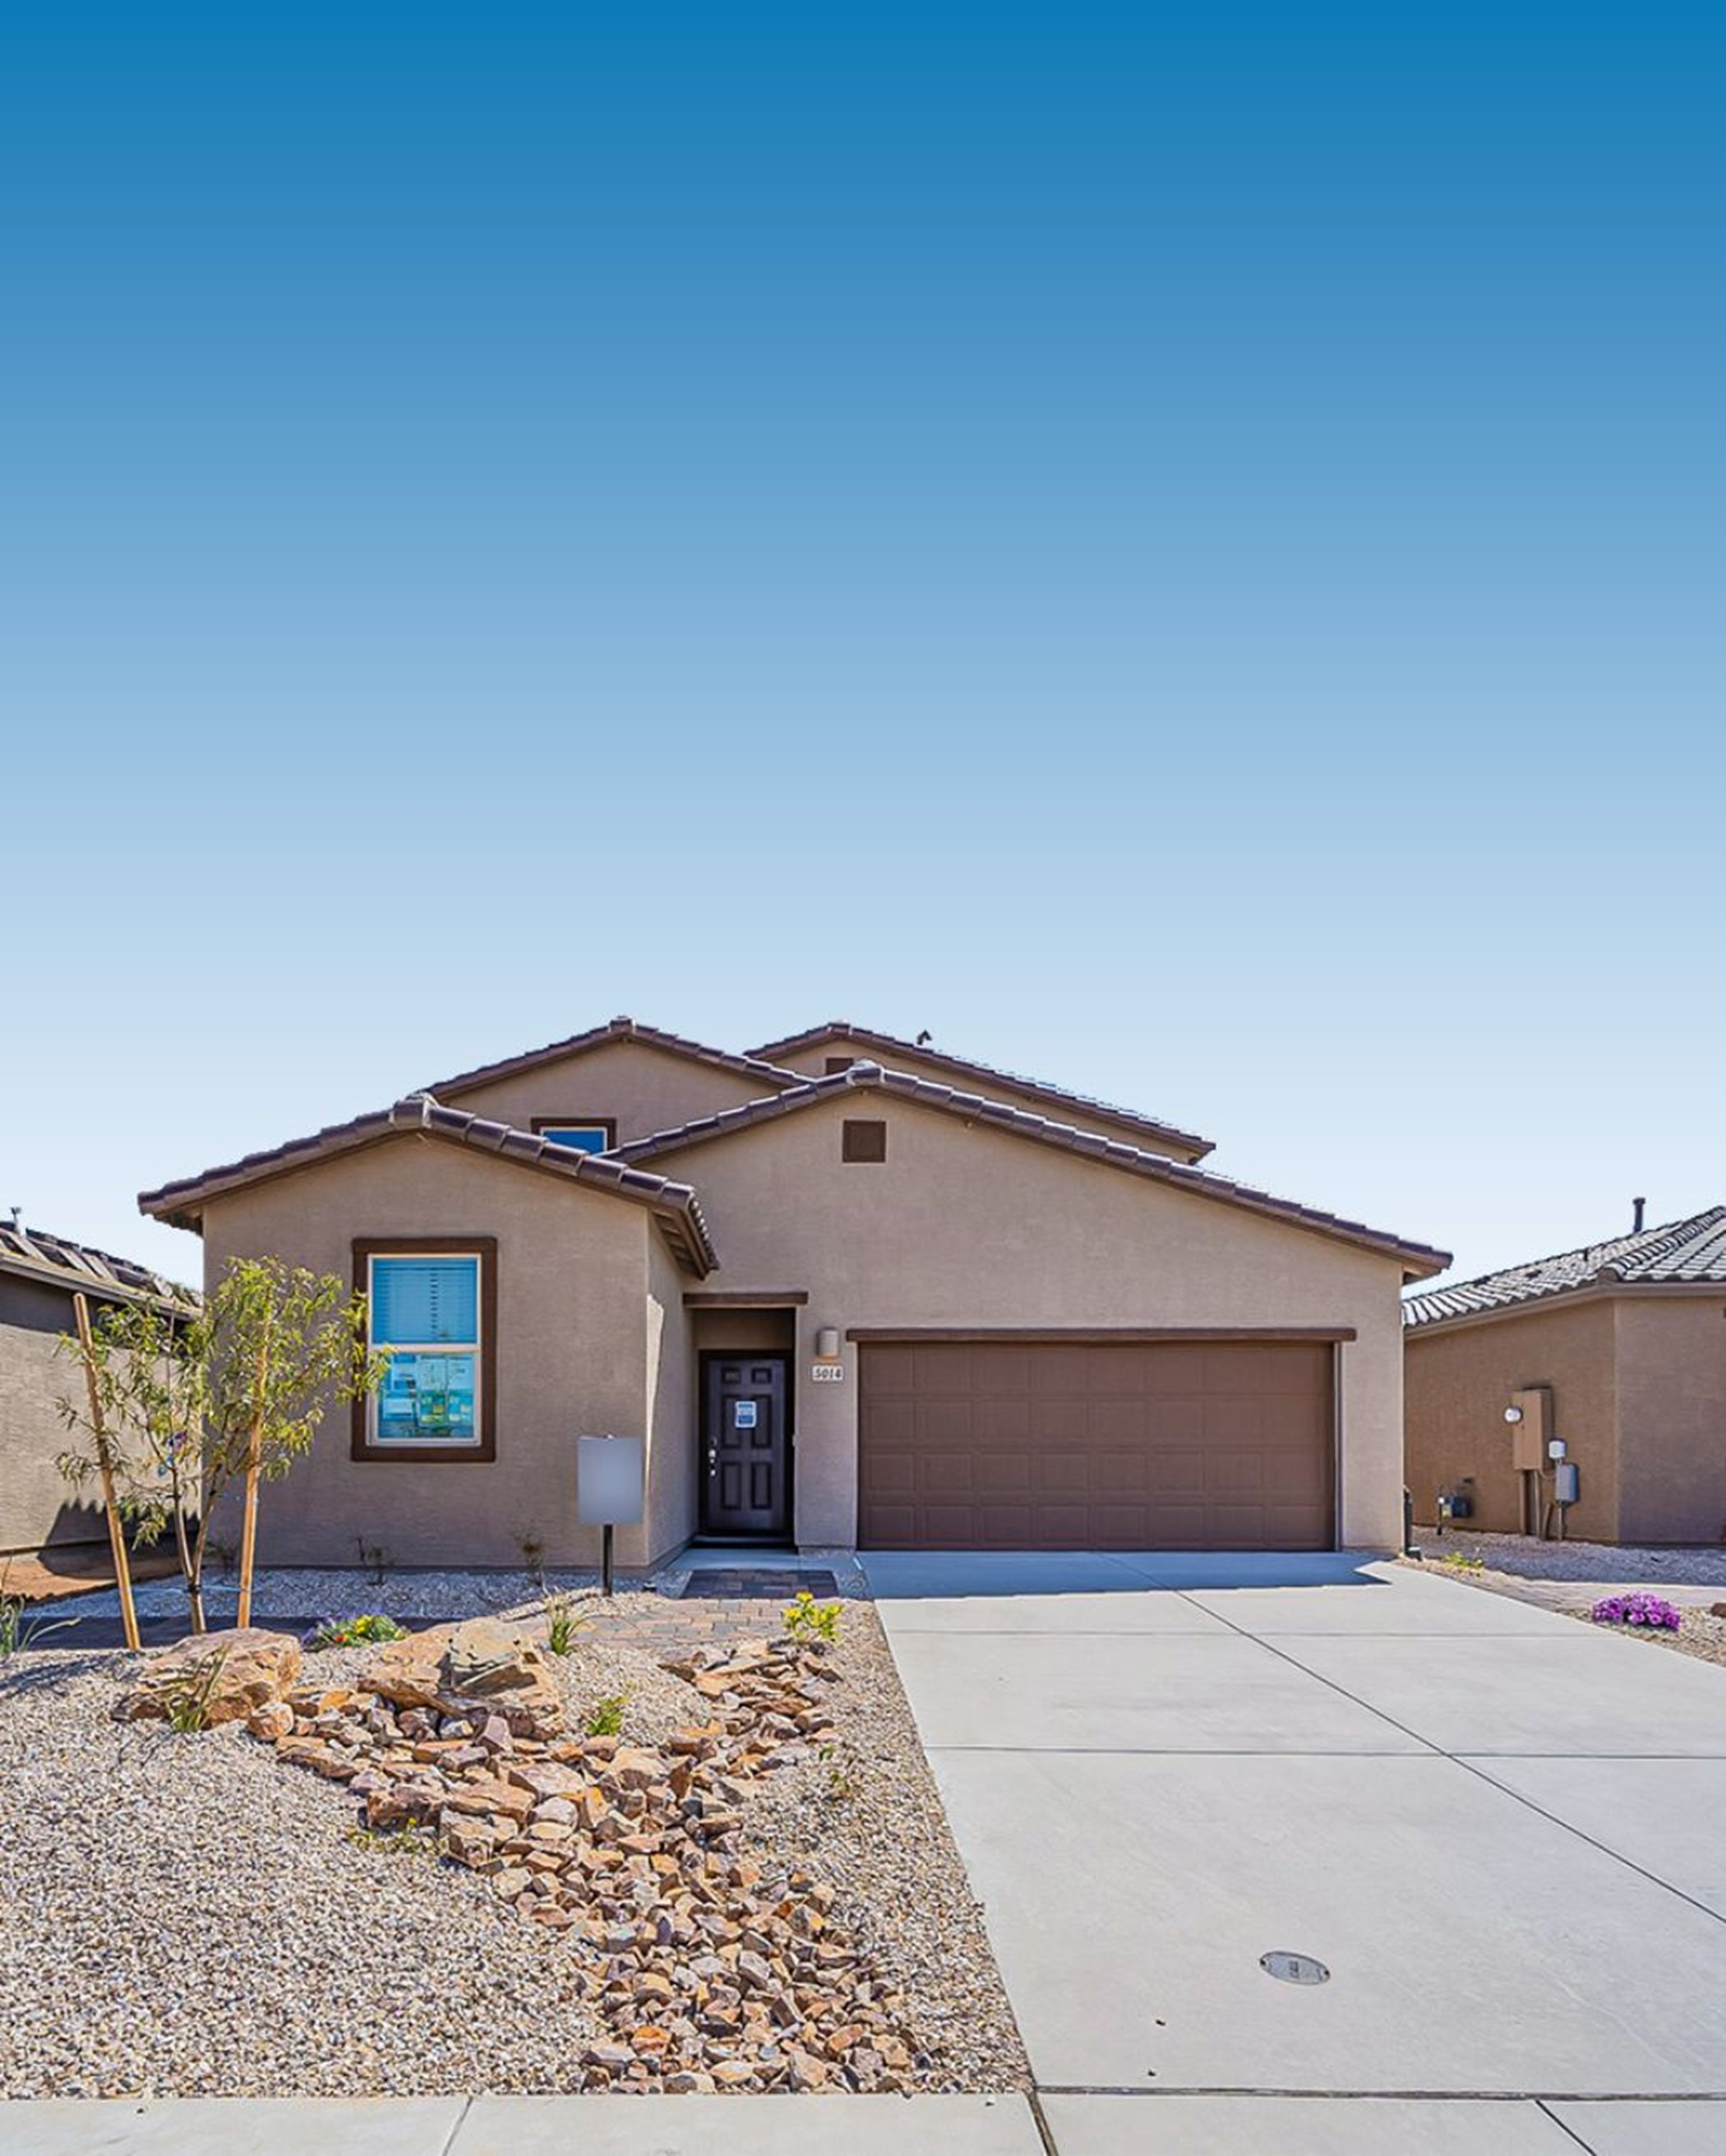 New homes for sale in the greater Tucson area